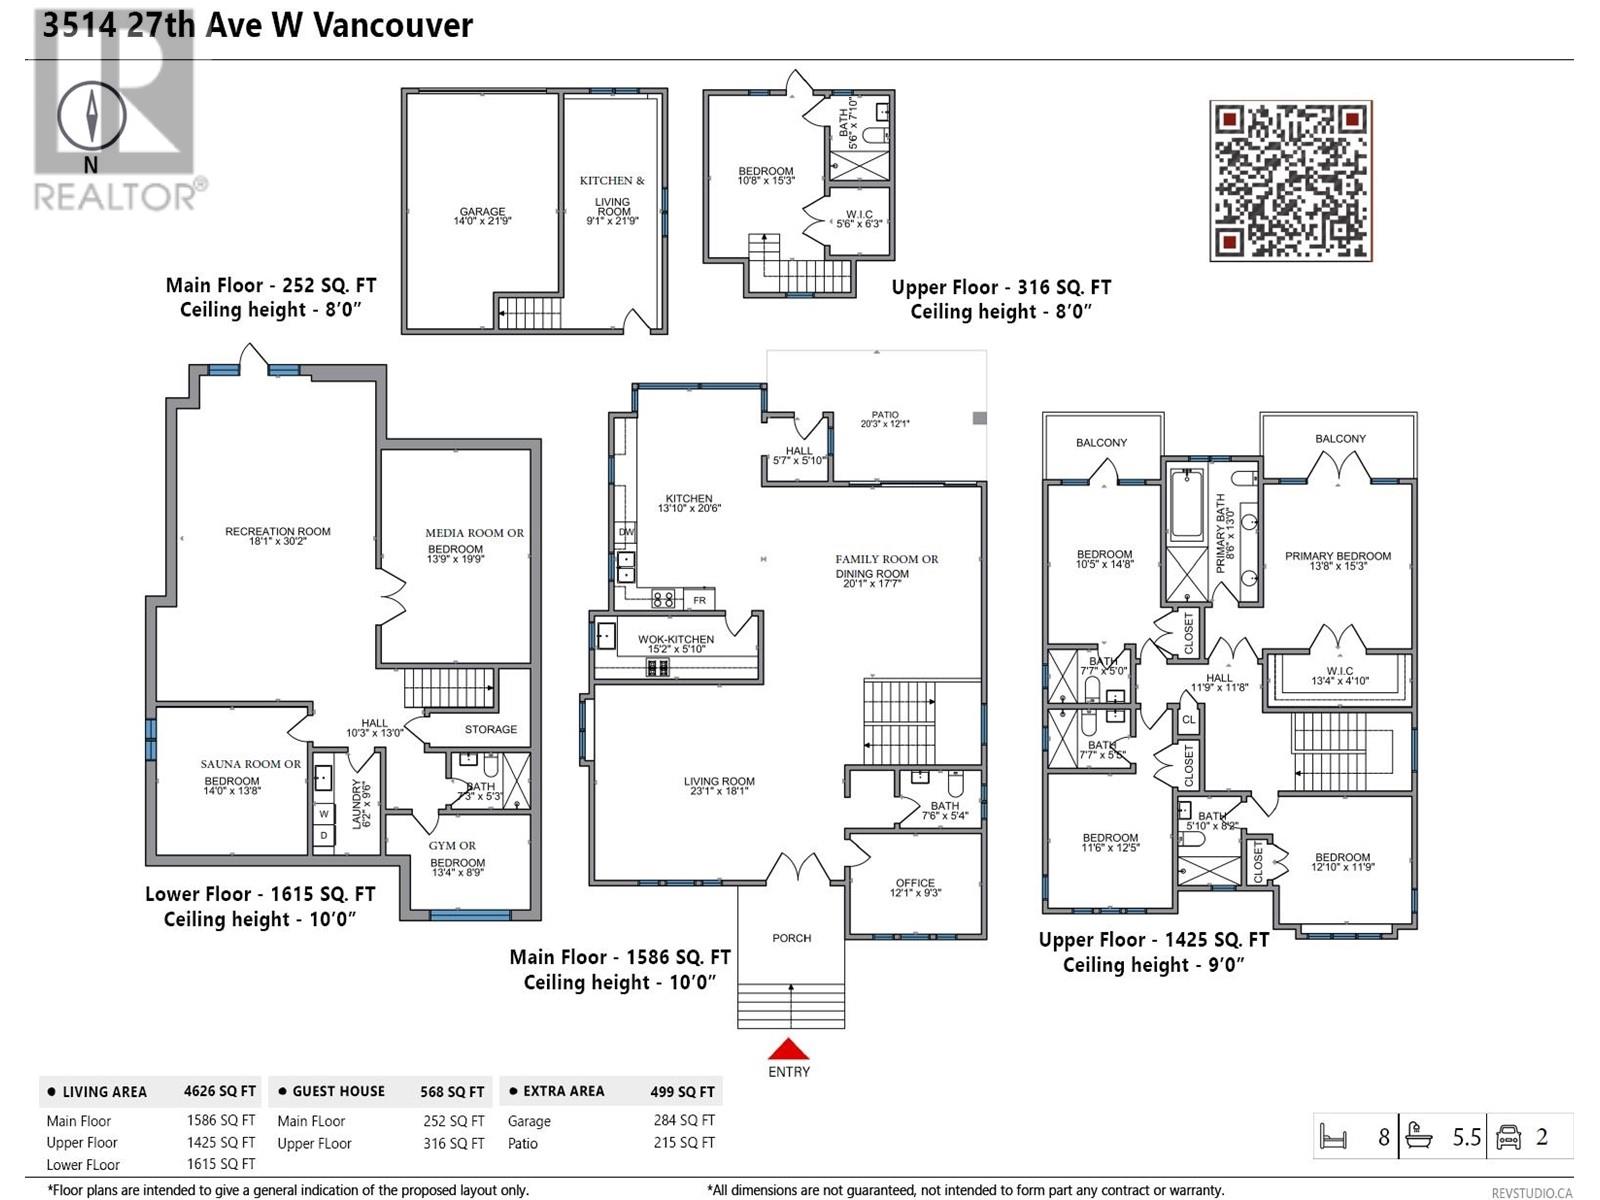 Listing Picture 38 of 38 : 3514 W 27TH AVENUE, Vancouver / 溫哥華 - 魯藝地產 Yvonne Lu Group - MLS Medallion Club Member